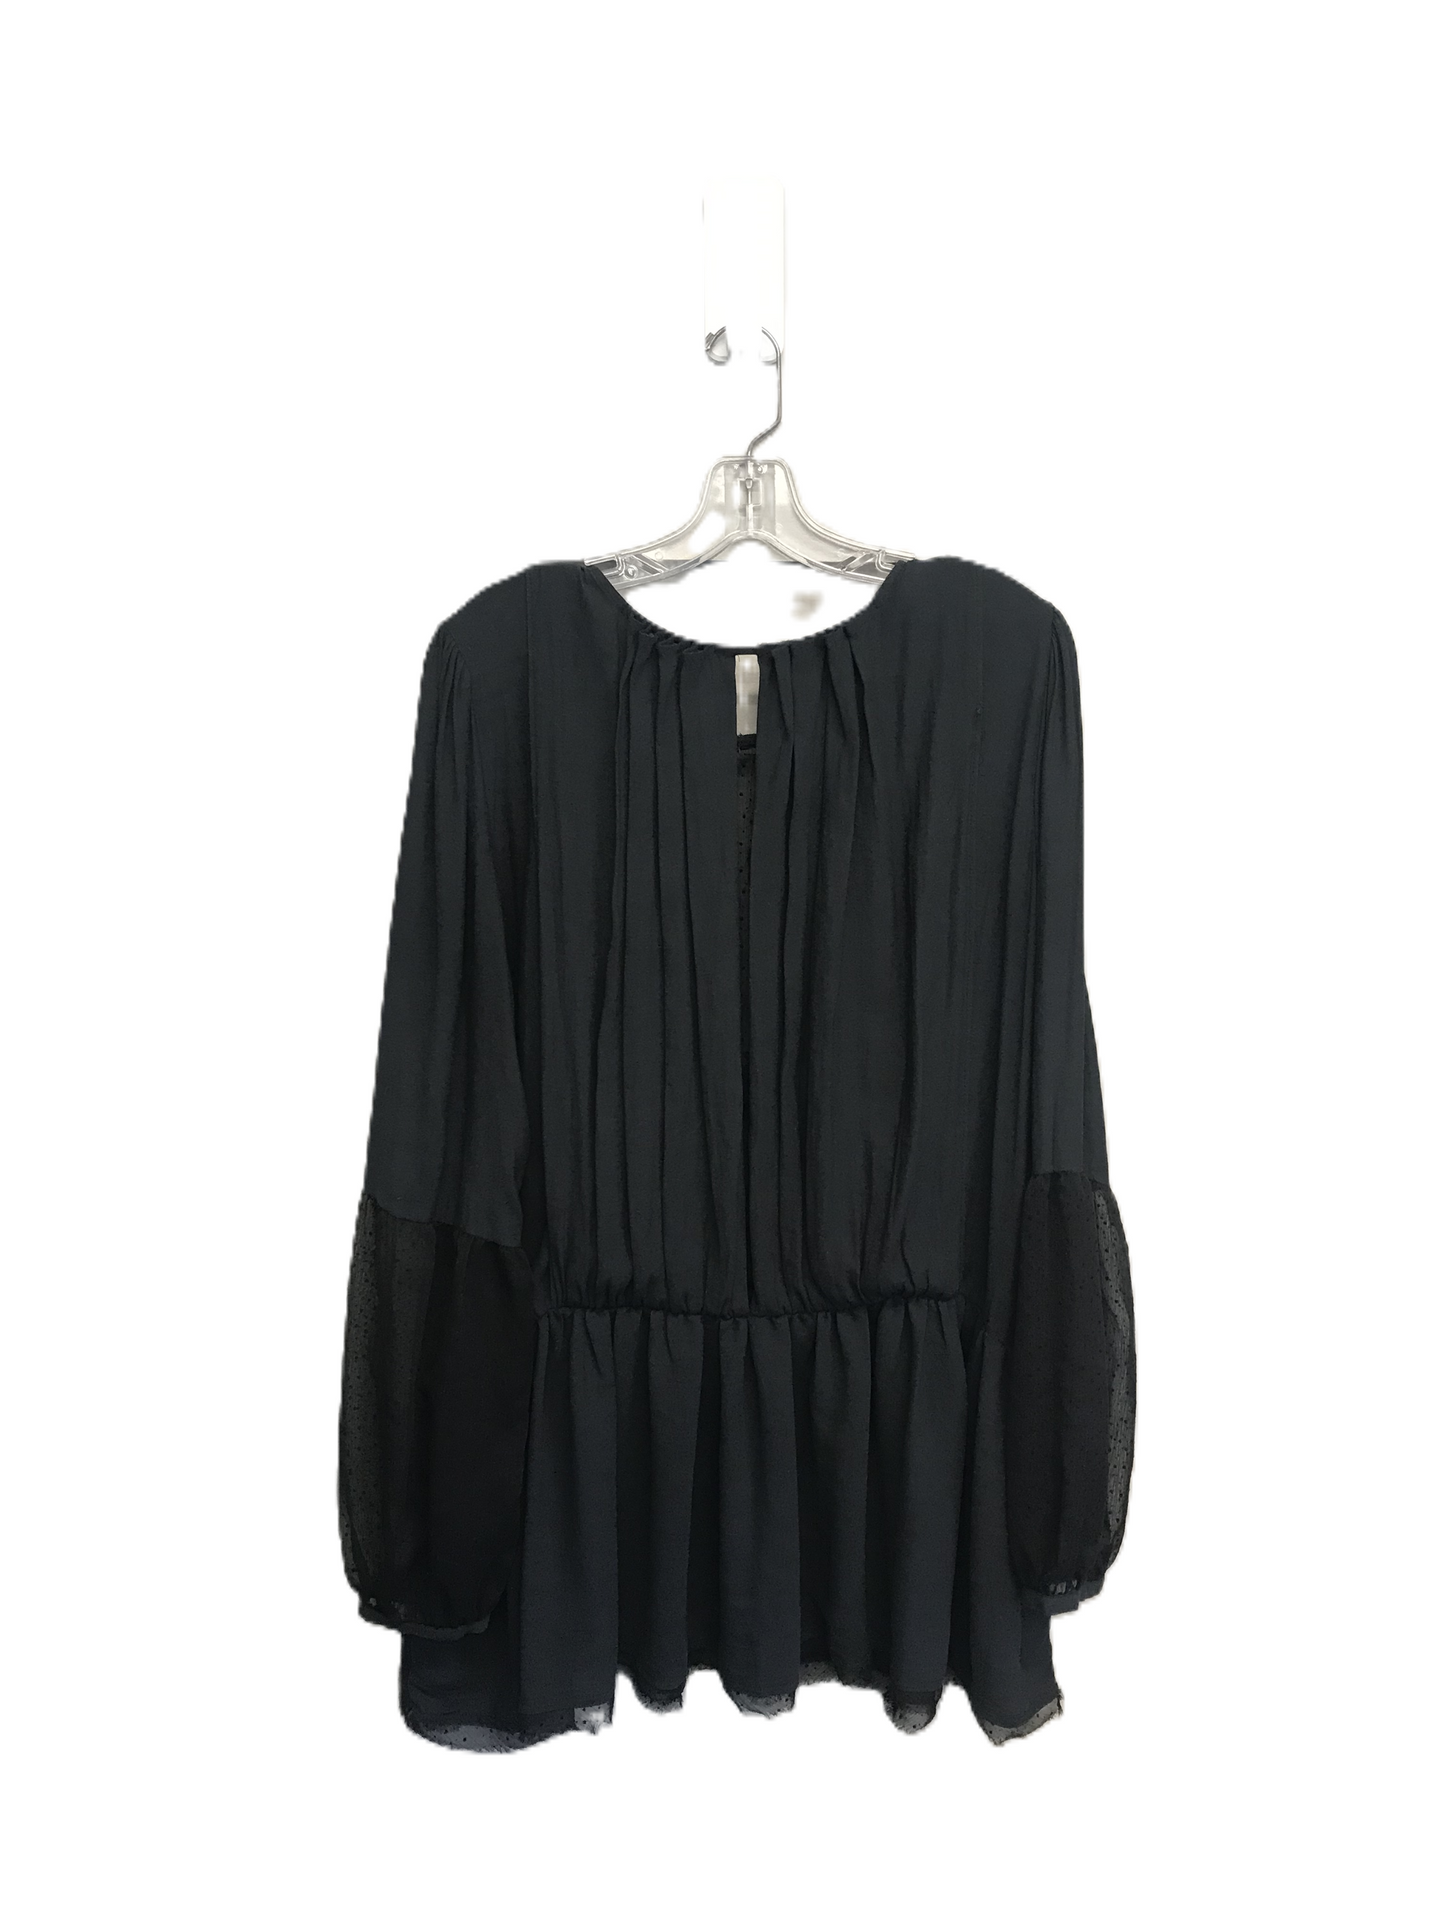 Black Top Long Sleeve By Free People, Size: L